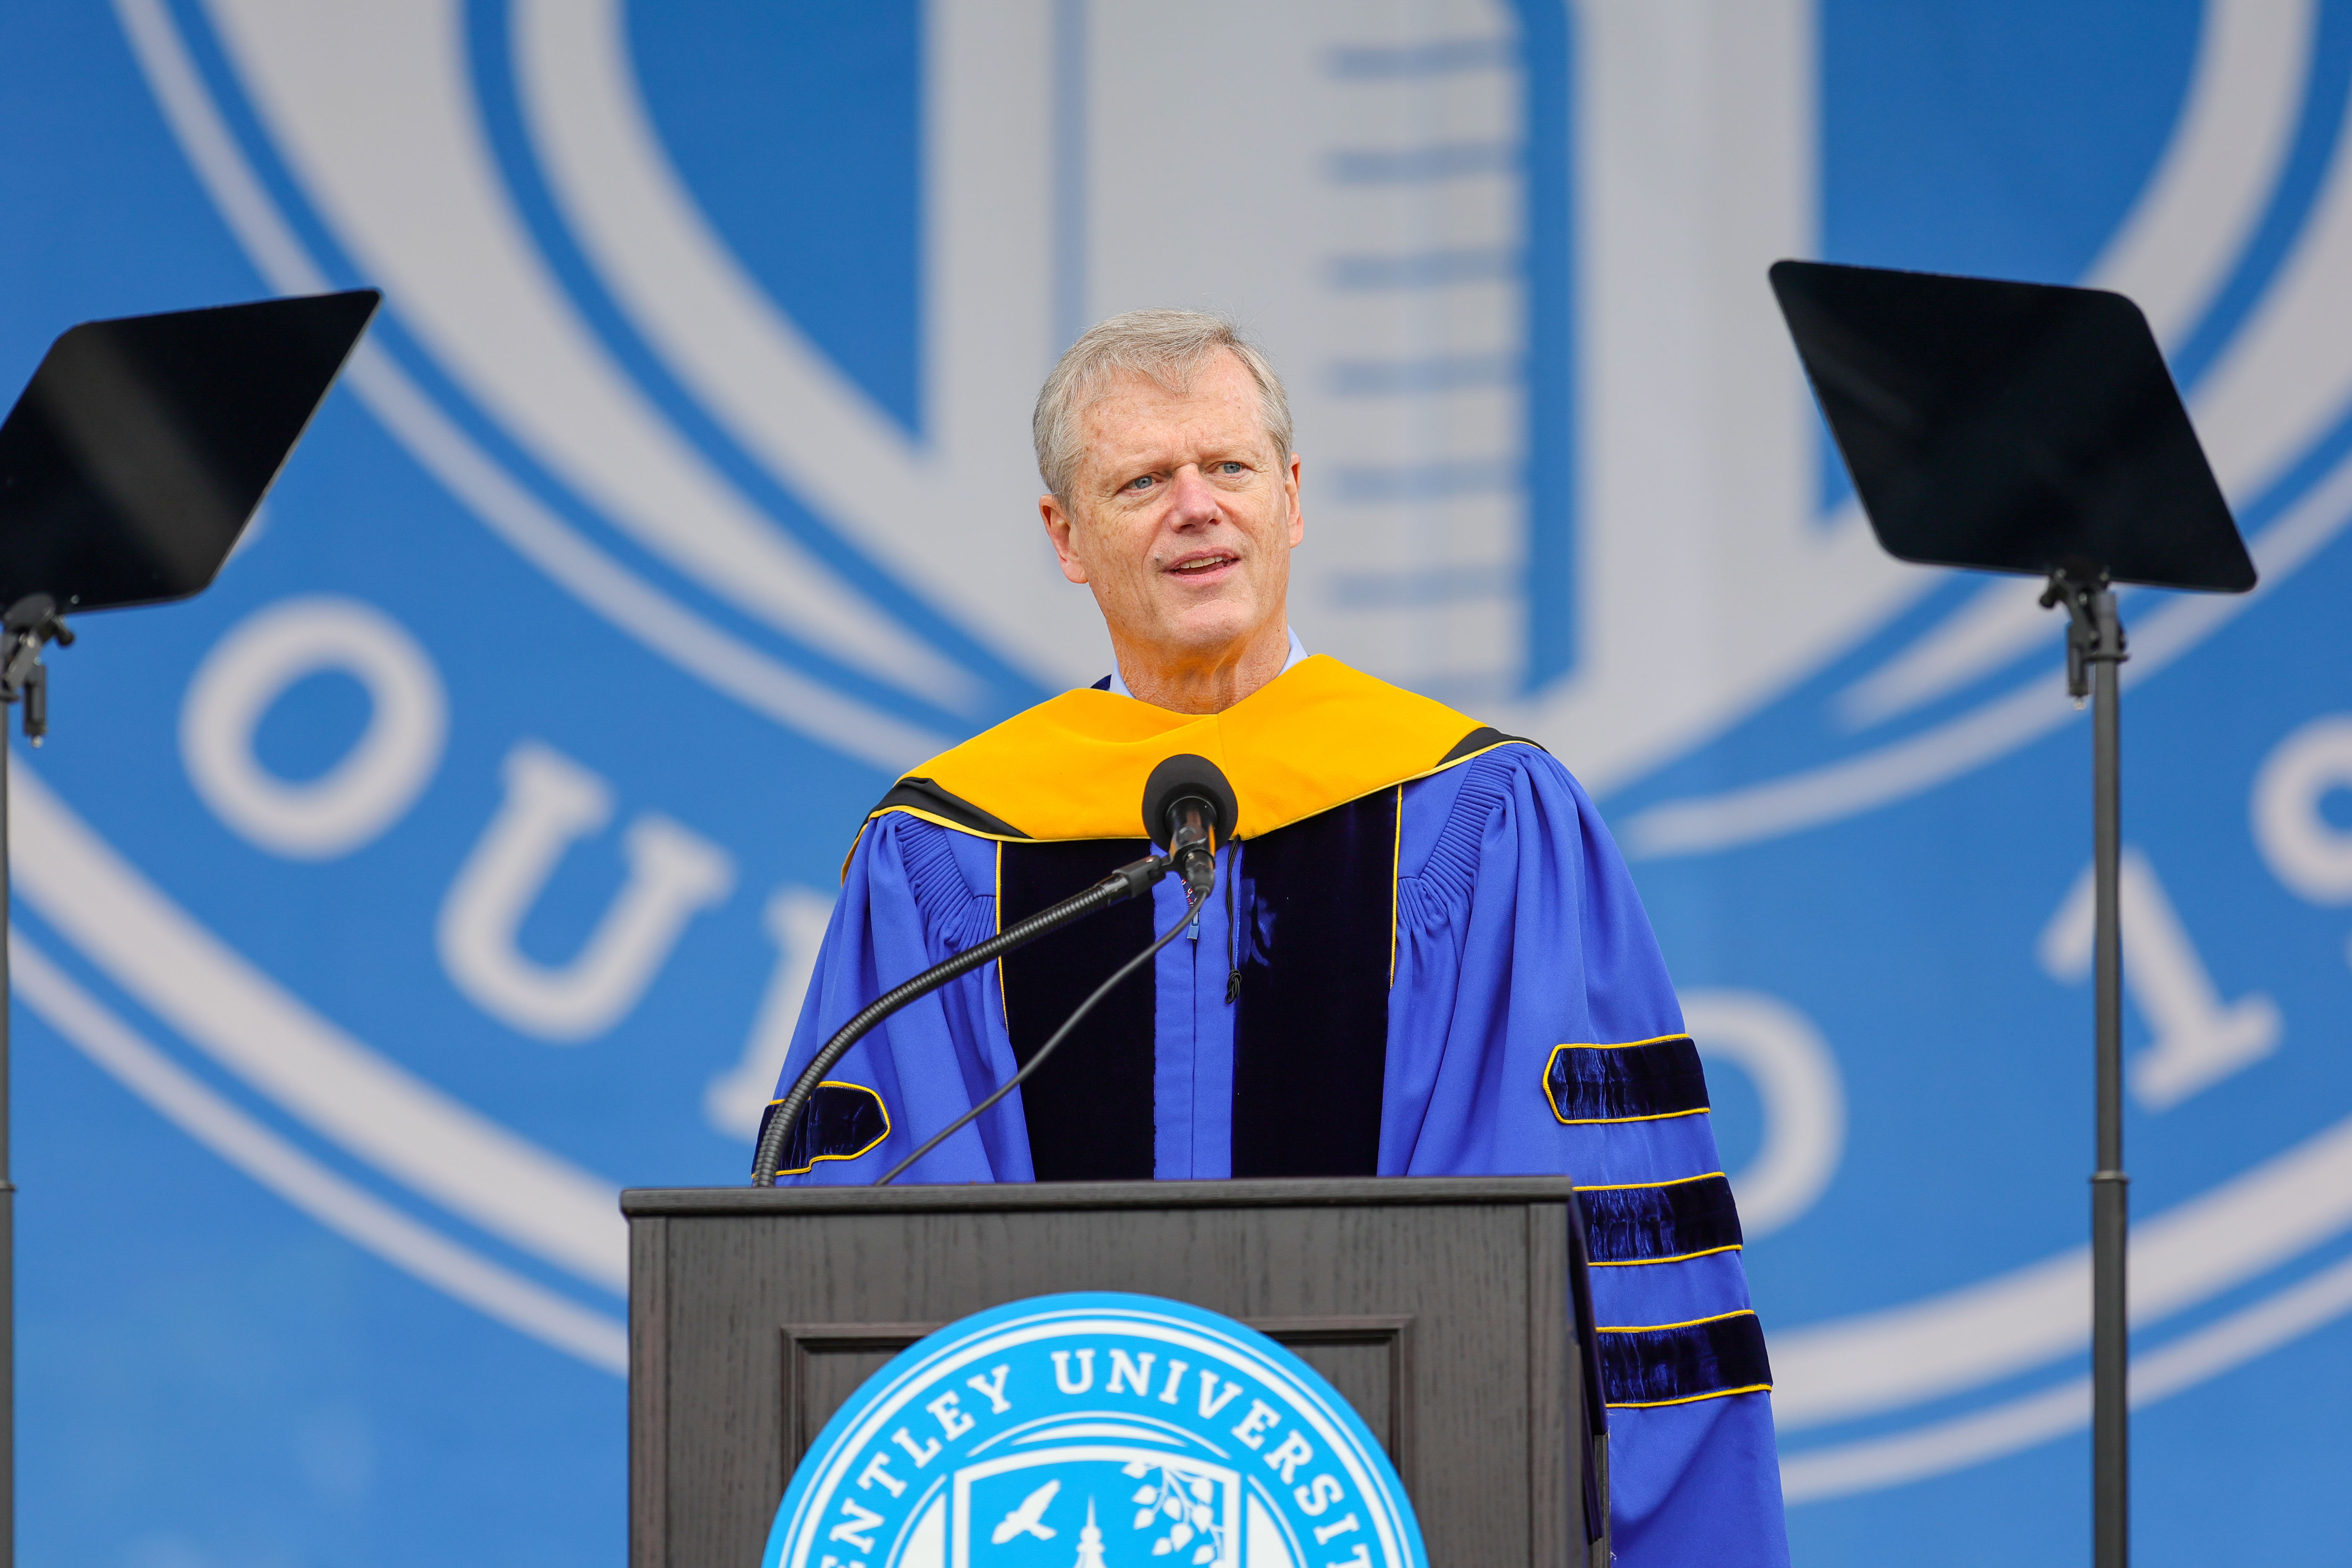 Charlie Baker speaks at a podium with the Bentley University logo behind him